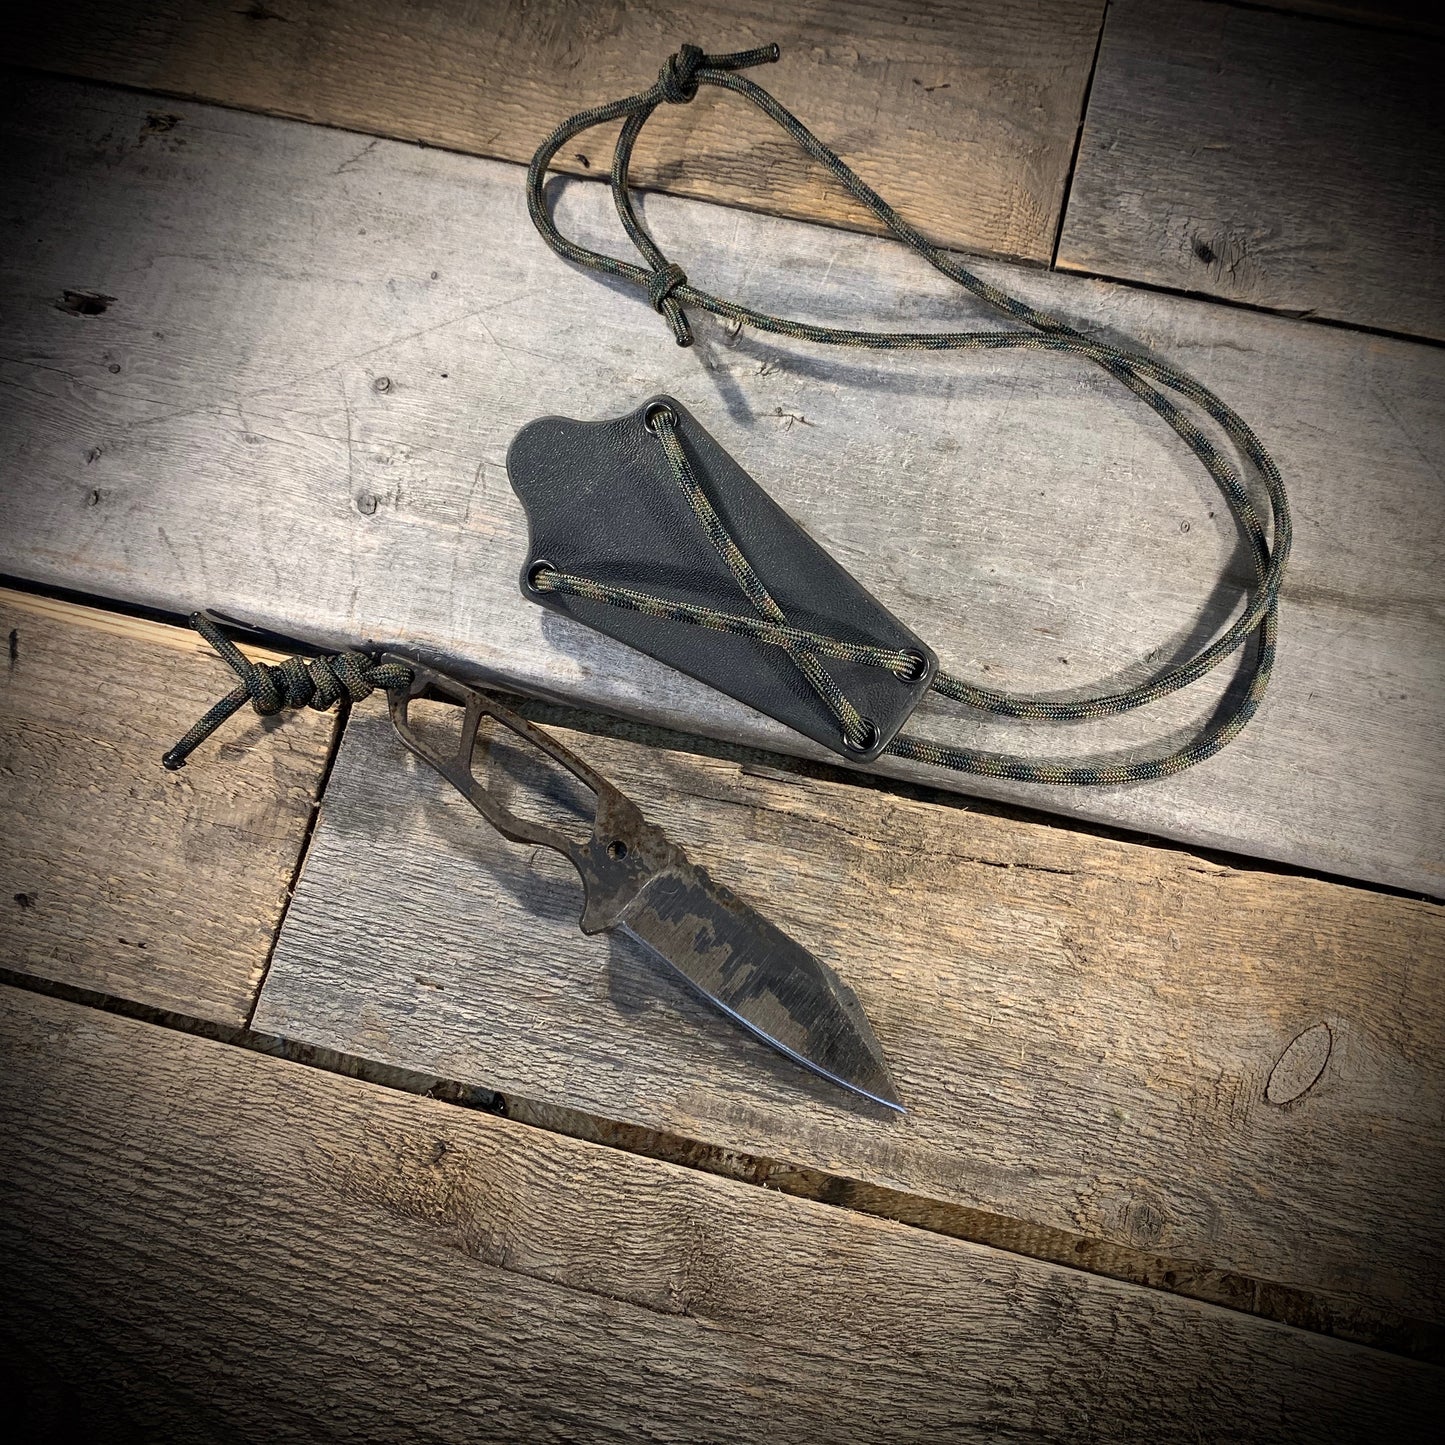 Hand Forged 1095  High Carbon Steel Neck Knife, perfect for Hiking and Bushcraft. Handmade by blacksmith Graeson Fehr In Winnipeg Manitoba Canada. Perfect for hiking, with durable black finish and paracord handle wrap. 